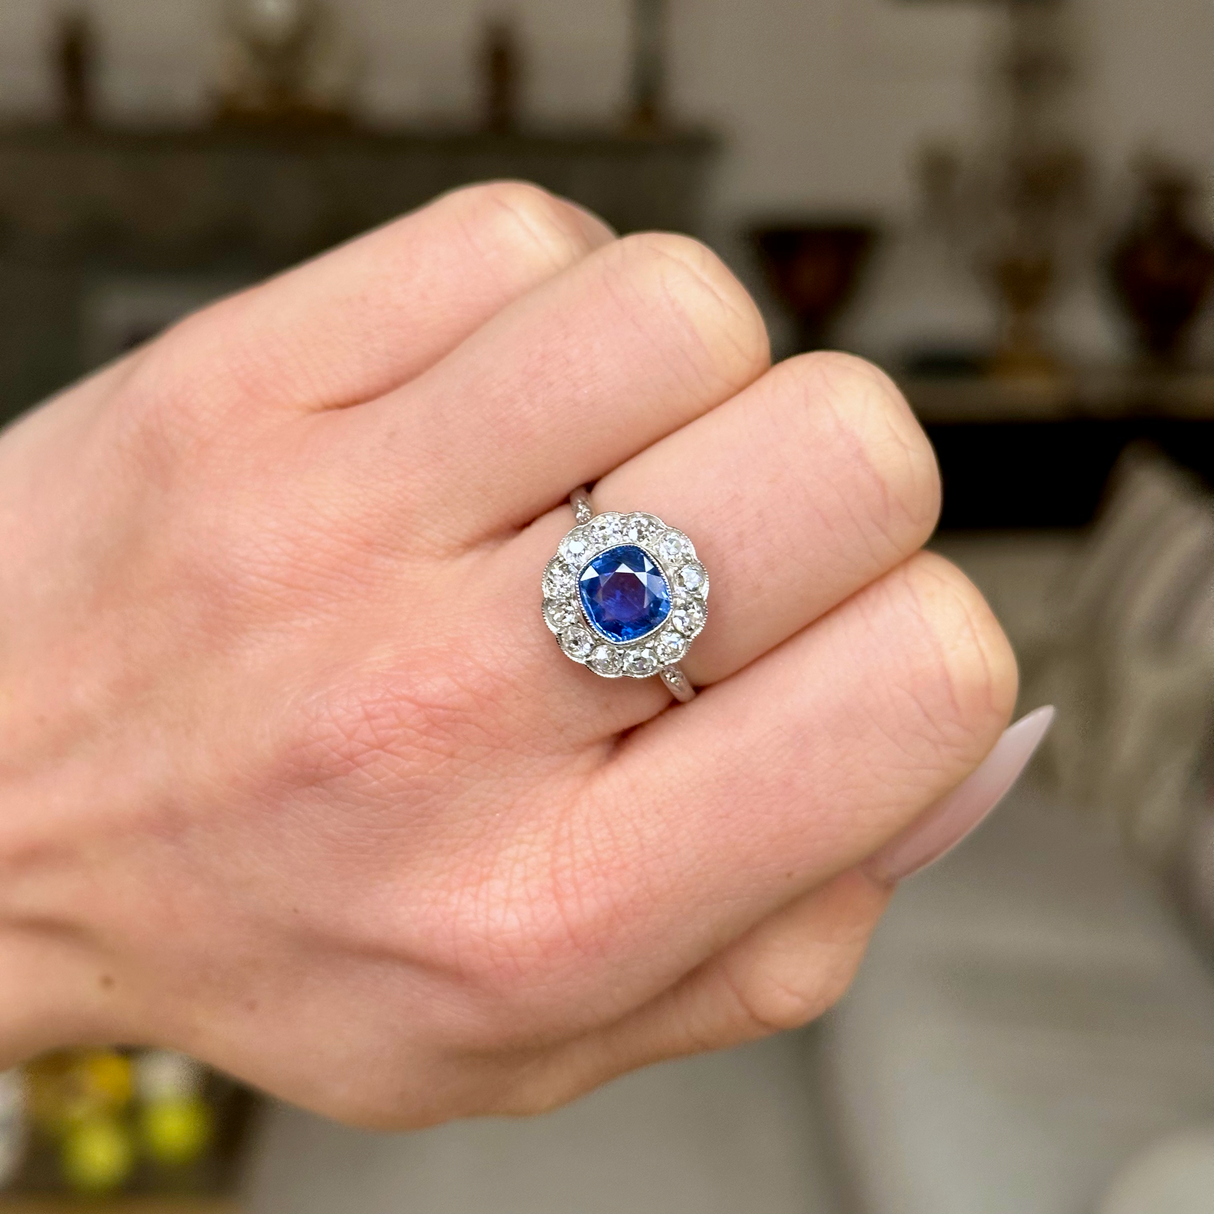 Vintage, 1940s Ceylon Cushion-Cut Sapphire and Diamond Cluster Engagement Ring, worn on hand